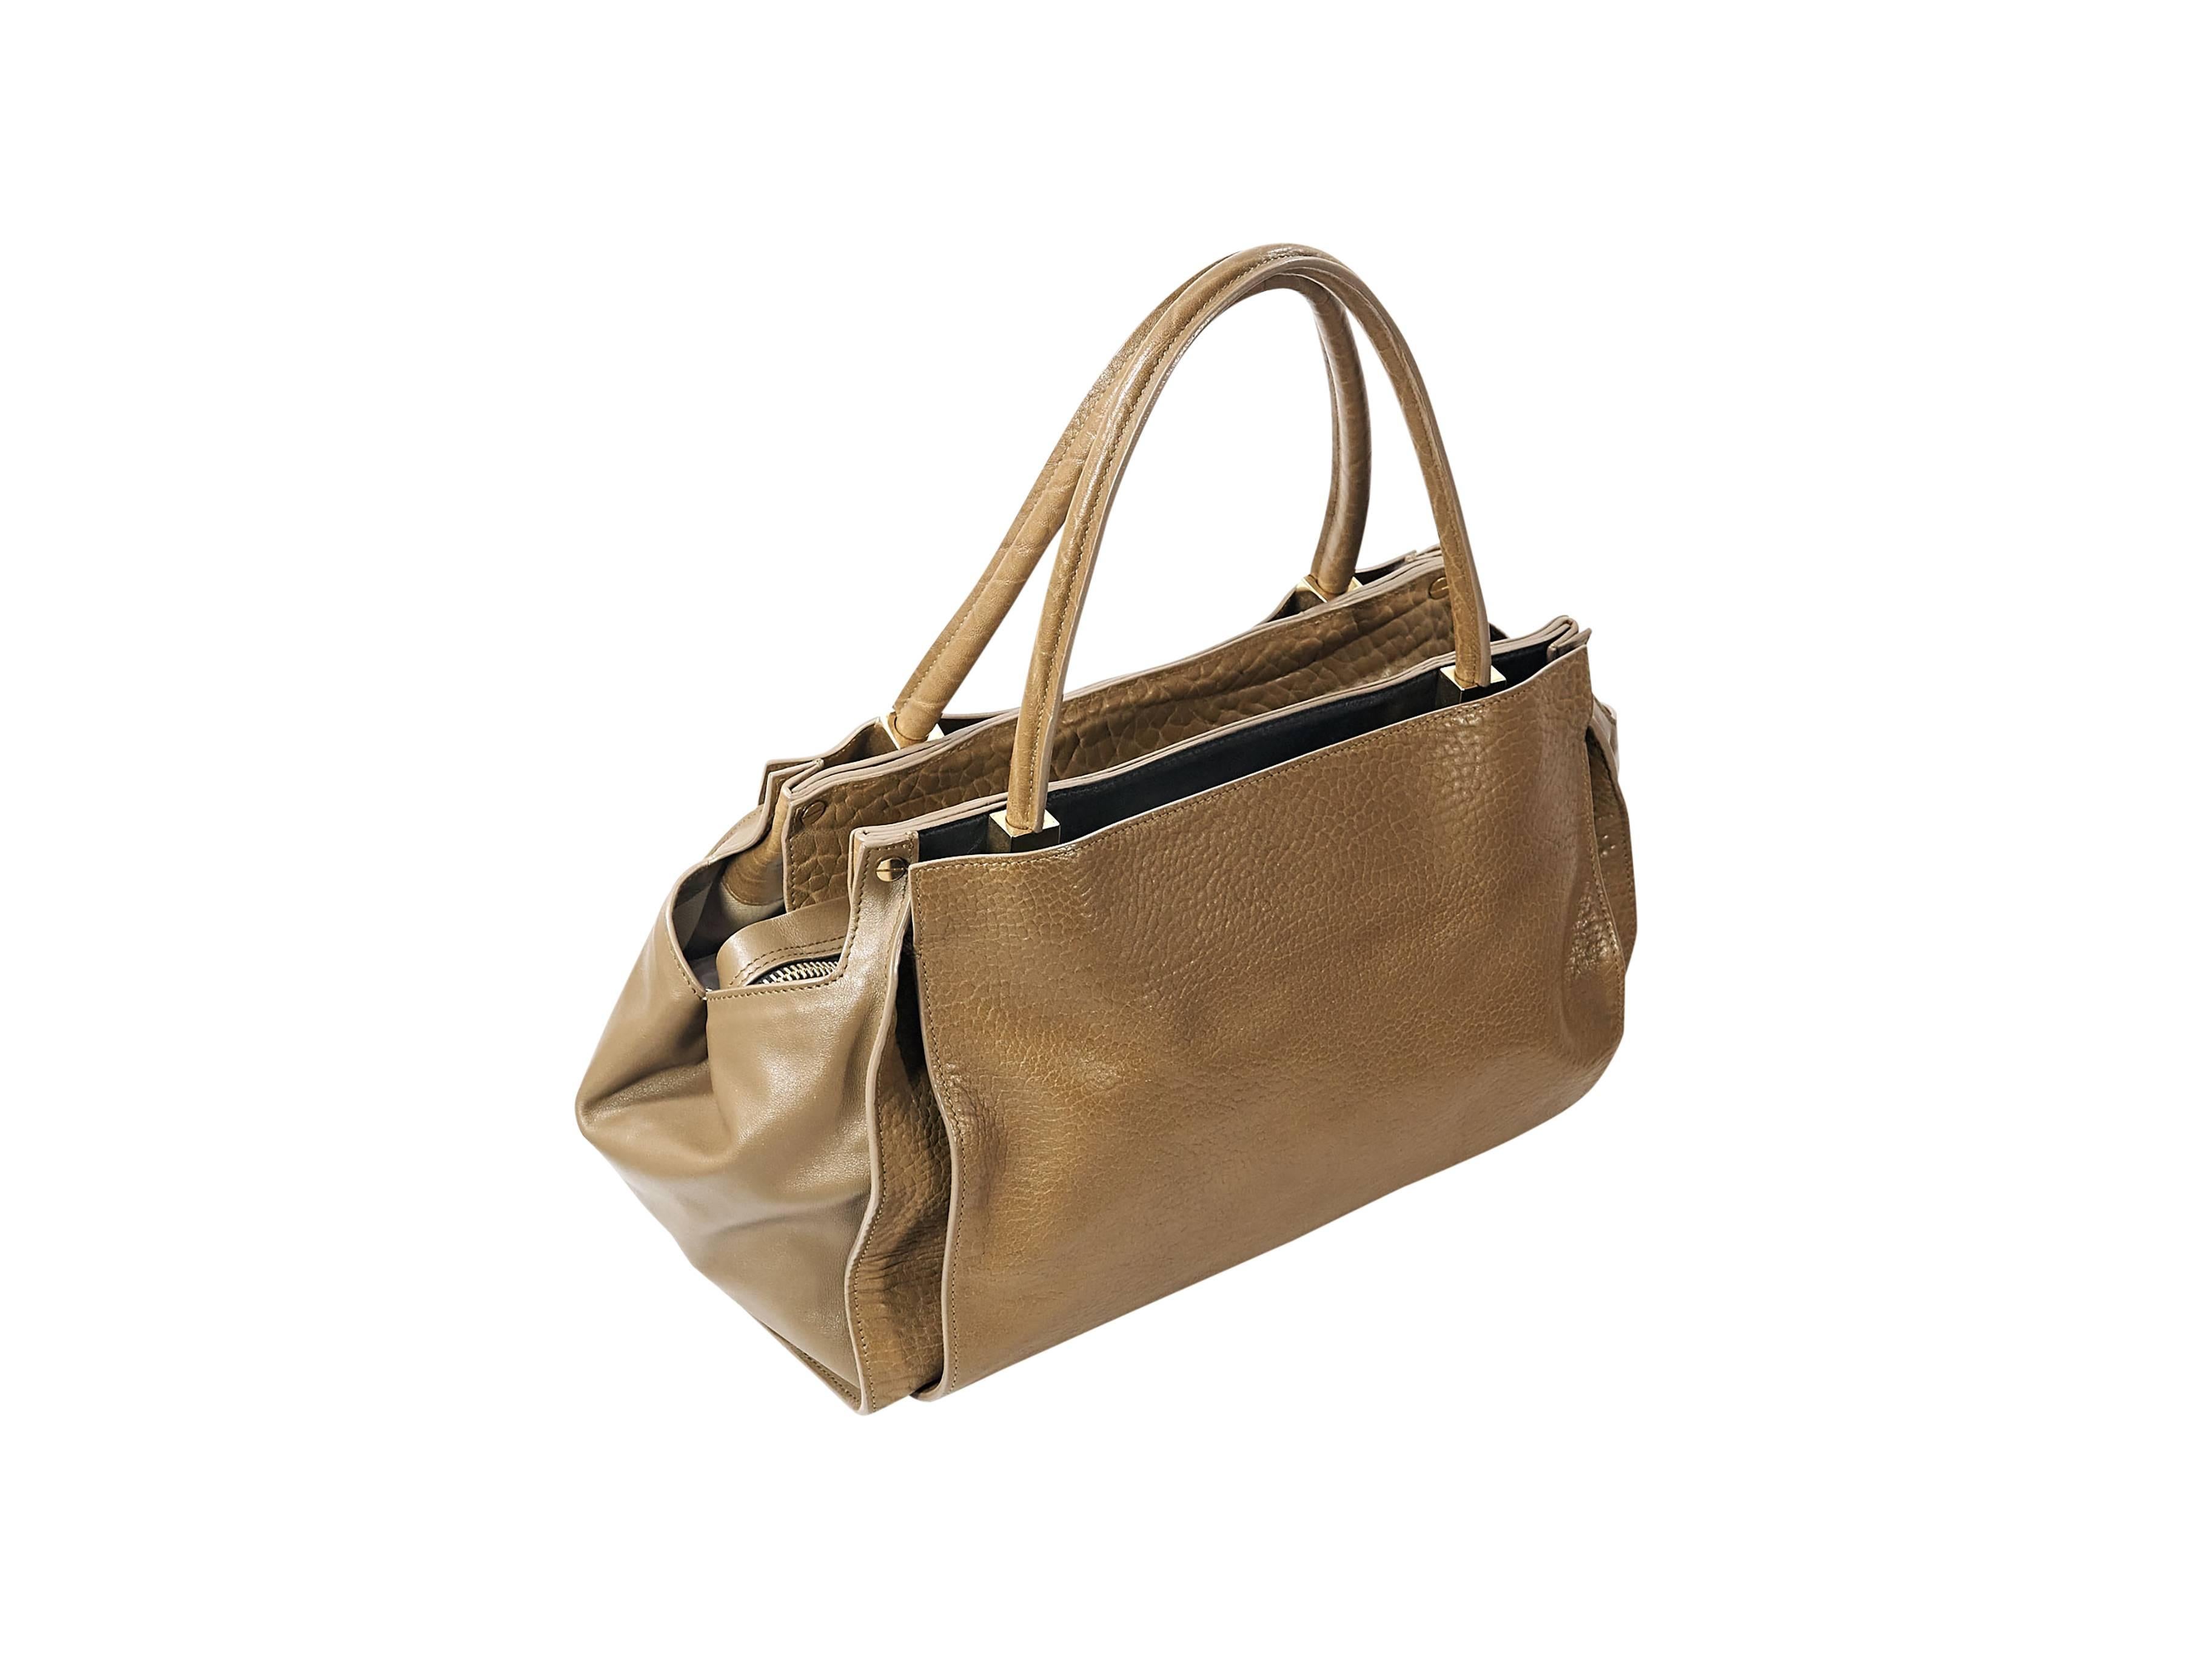 Product details: Tan leather Dree tote bag by Chloe. Dual shoulder straps. Zip closure. Lined interior with inner slide pockets. Protective metal feet. Goldtone hardware. 14